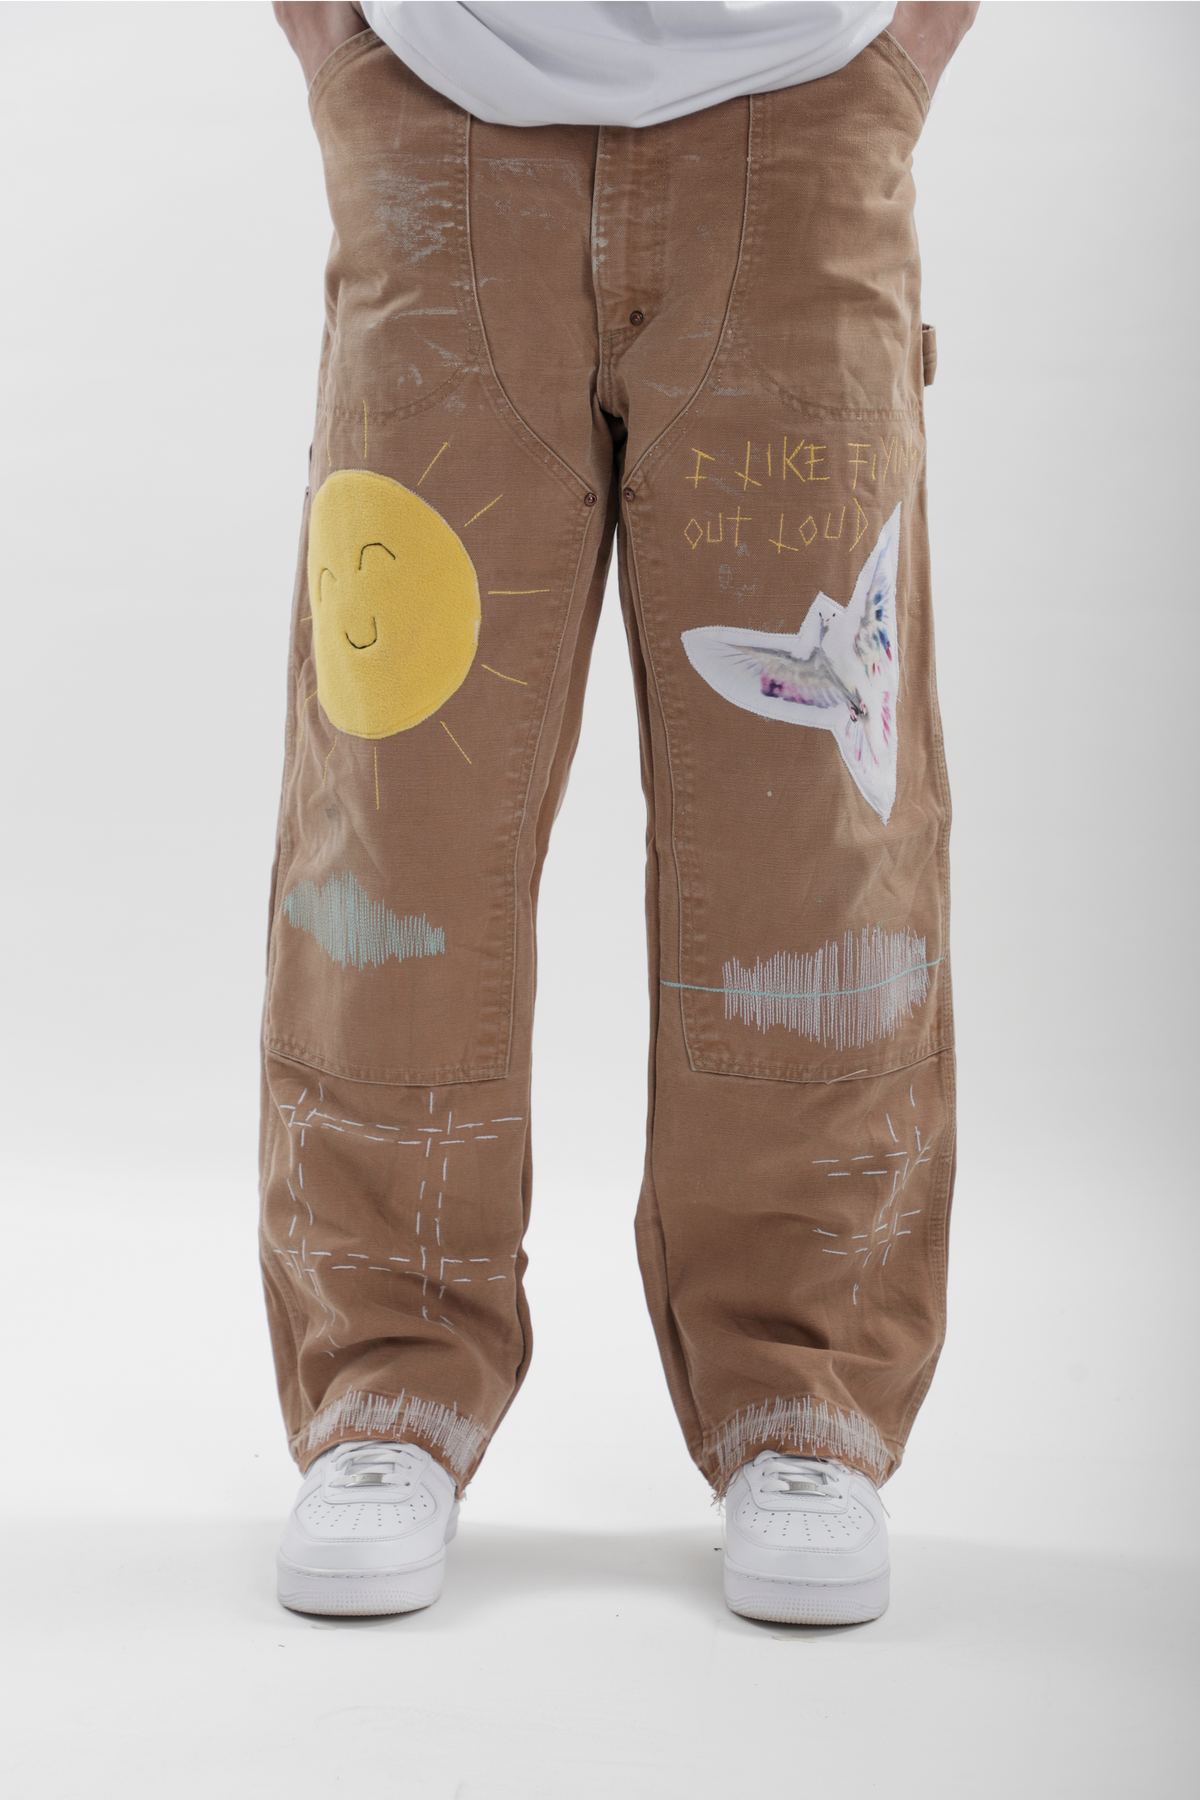 Earthtone Brown Upcycled Denims, a product by TOFFLE